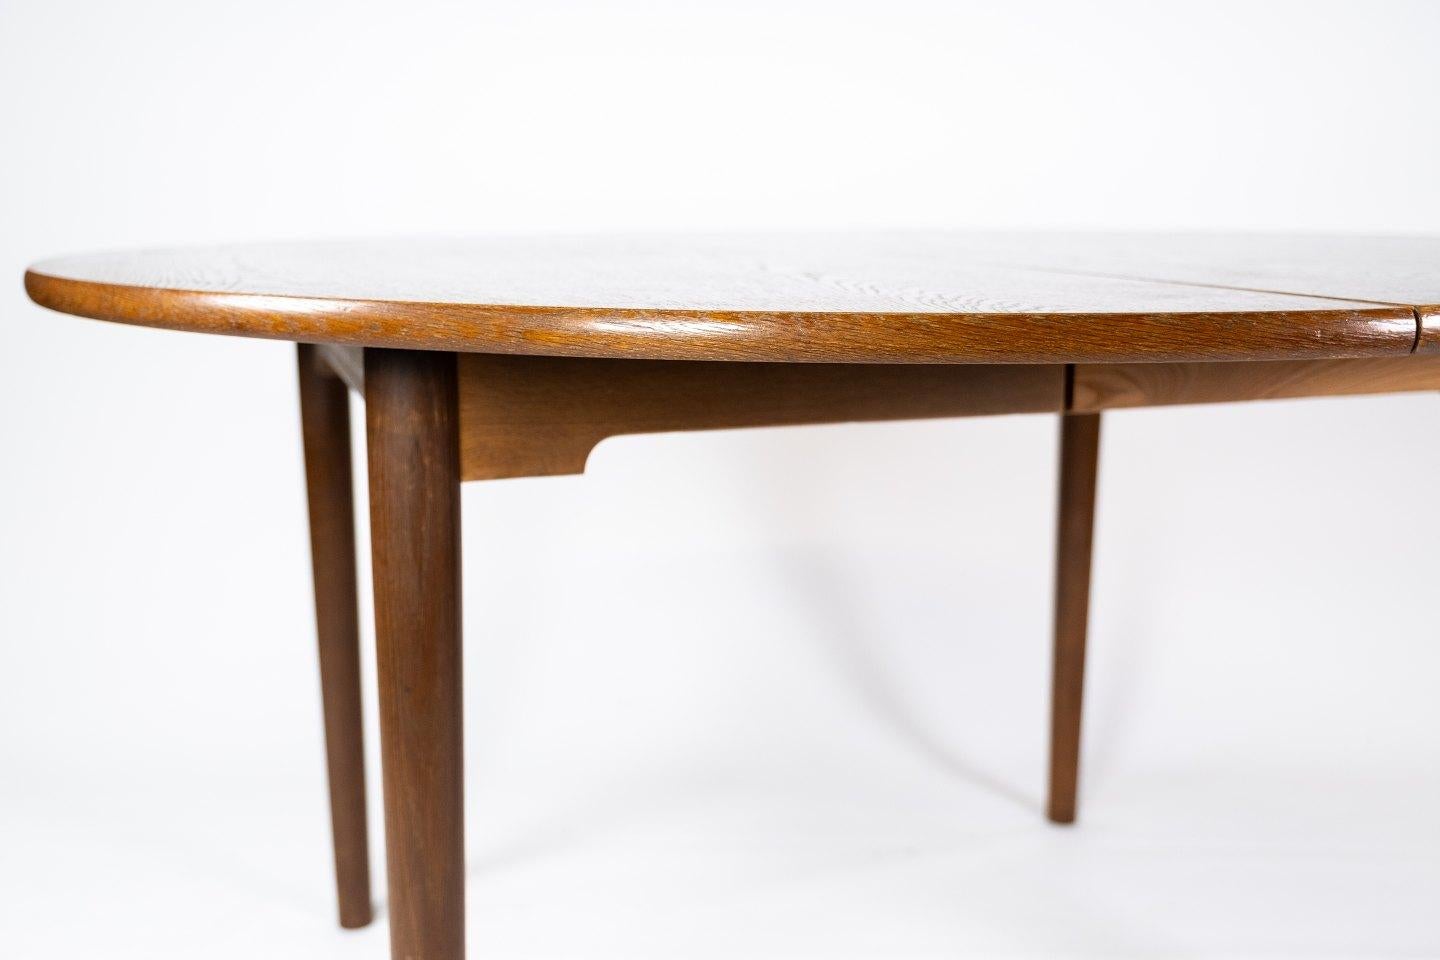 Dining Table Made In Dark Oak, Danish Design From 1960s In Good Condition For Sale In Lejre, DK